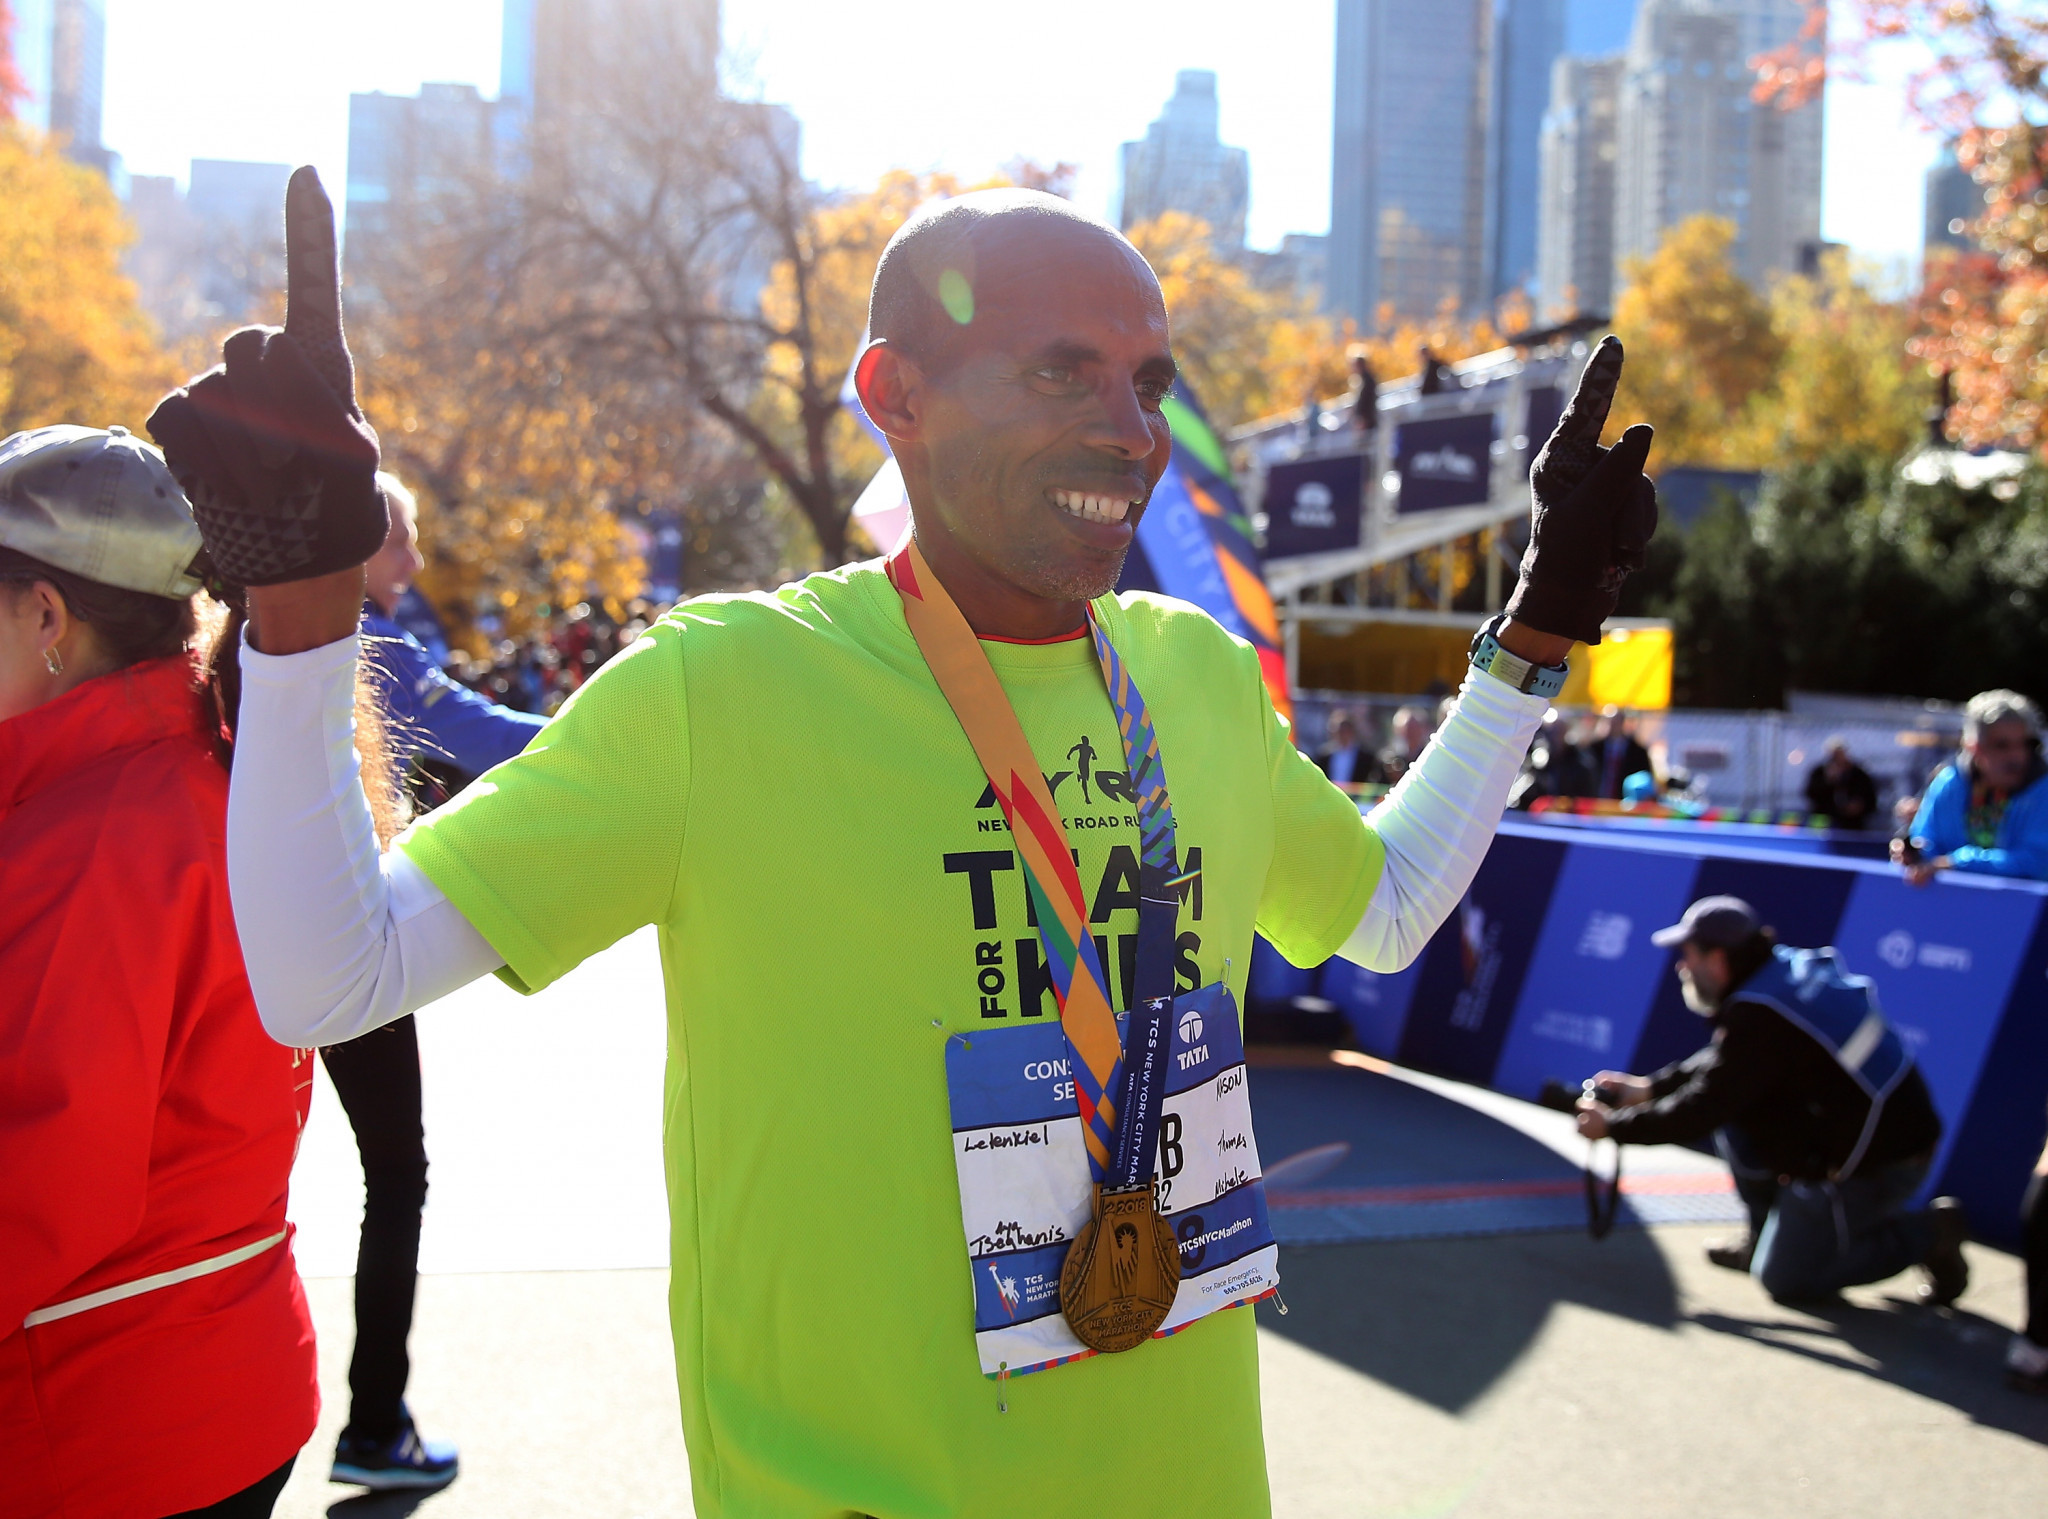 Former New York City Marathon champion Meb Keflezighi will be teaming up with retired tennis player James Blake ©Getty Images